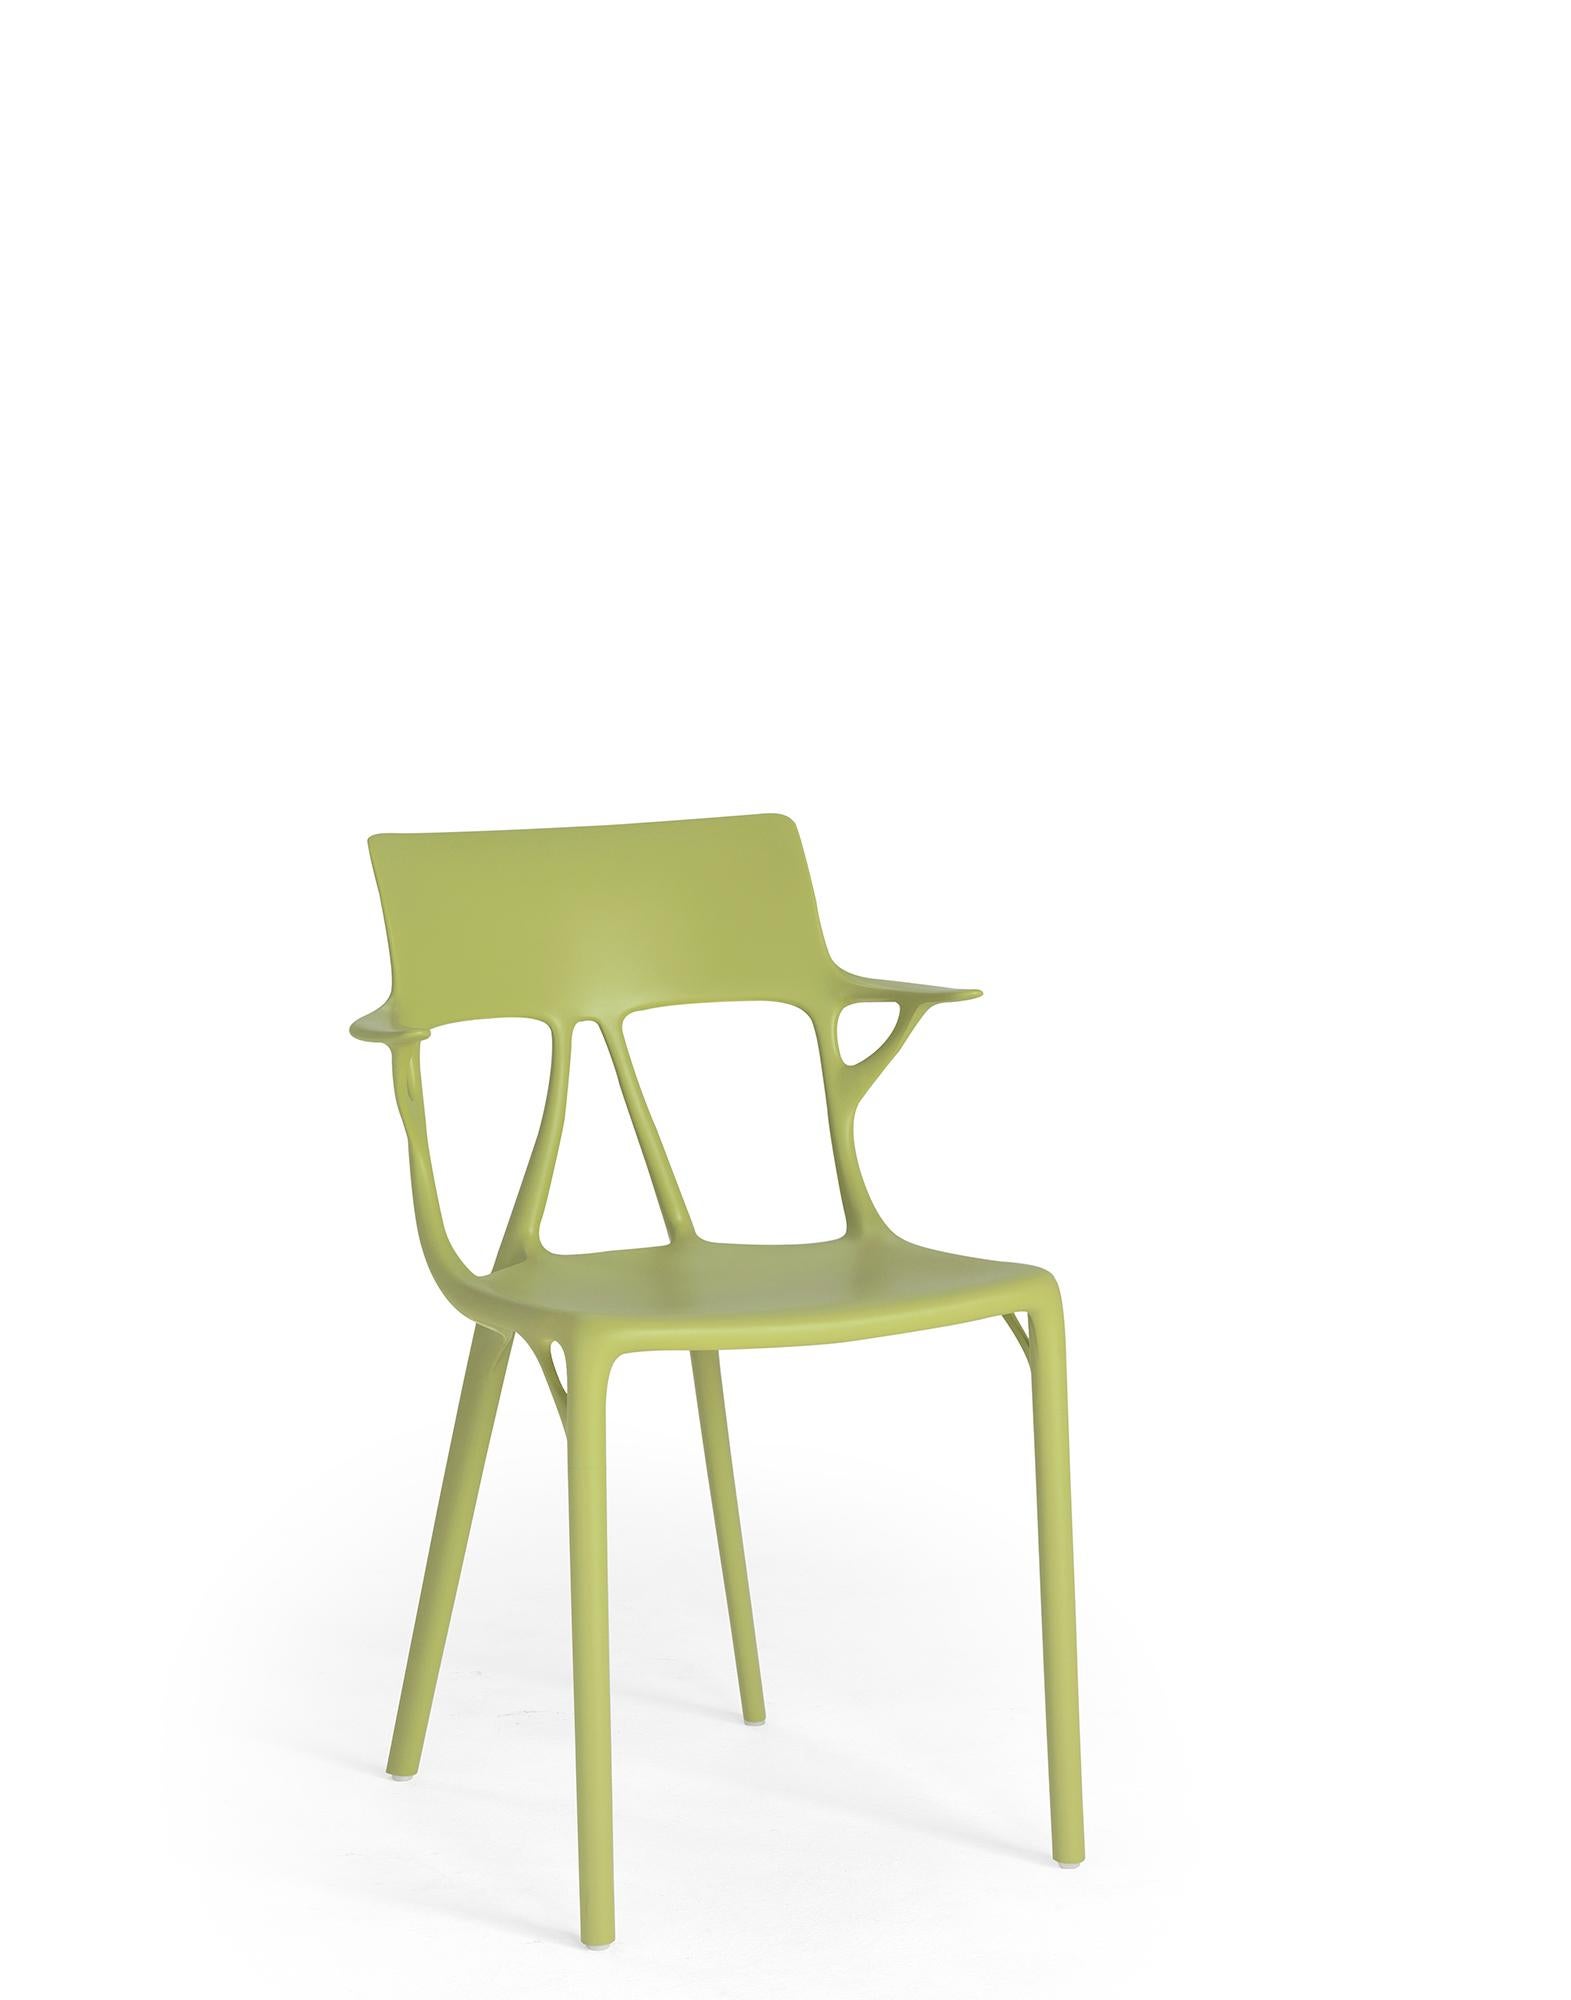 Kartell continues its ongoing commitment to sustainability with eco-friendly products which are part of the broader project expressed by the industrial manifesto Kartell loves the planet. 
A.I. is the chair created for the first time ever using